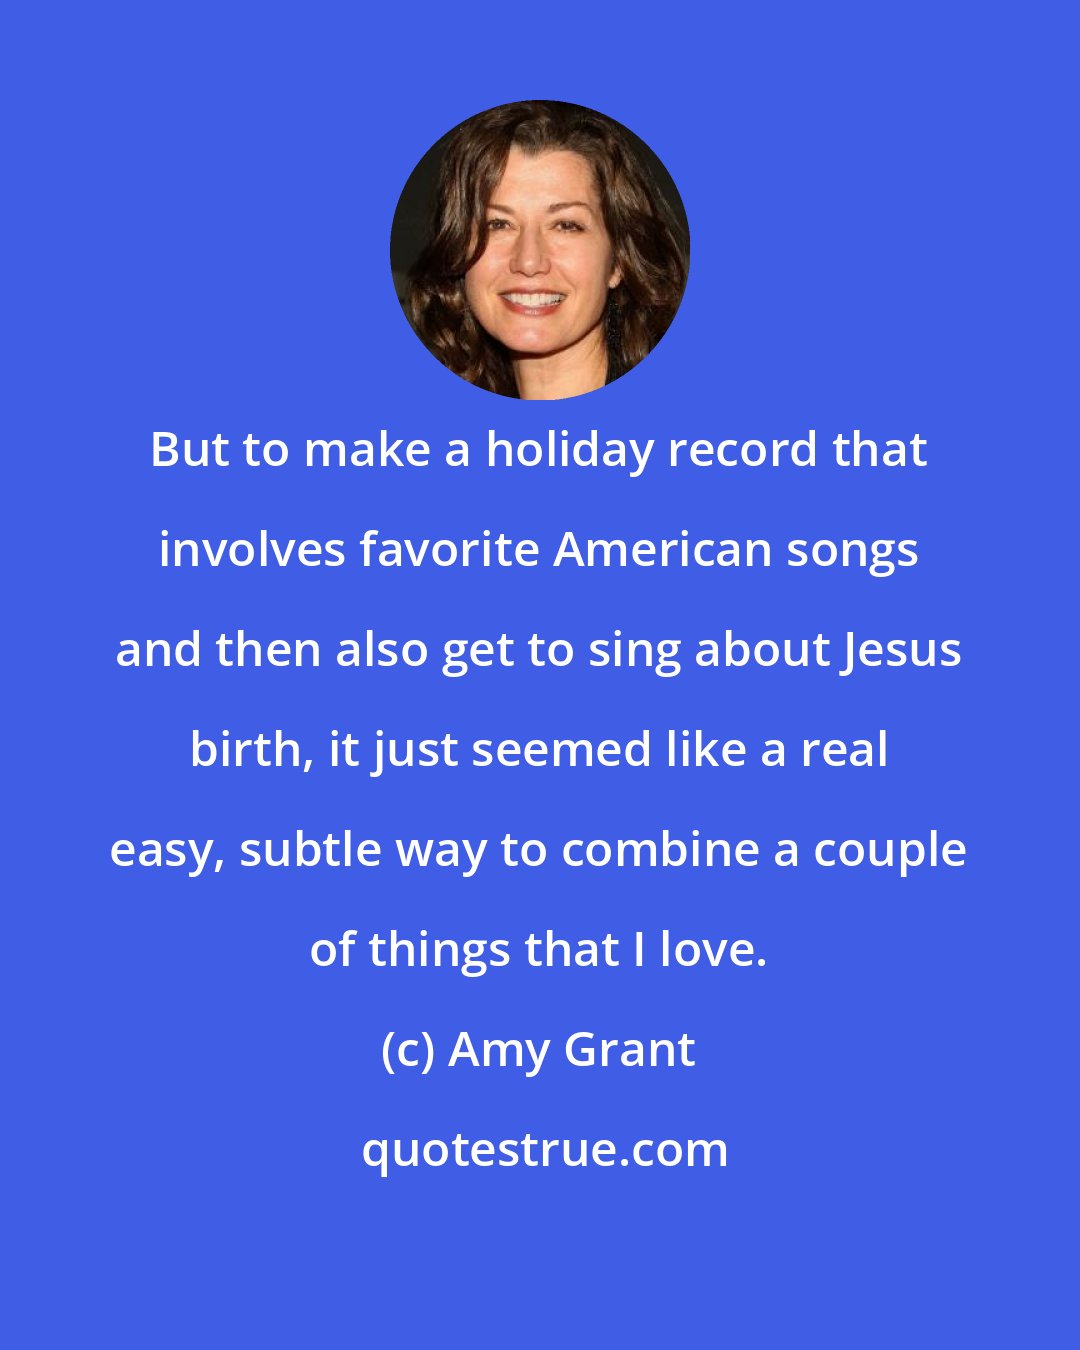 Amy Grant: But to make a holiday record that involves favorite American songs and then also get to sing about Jesus birth, it just seemed like a real easy, subtle way to combine a couple of things that I love.